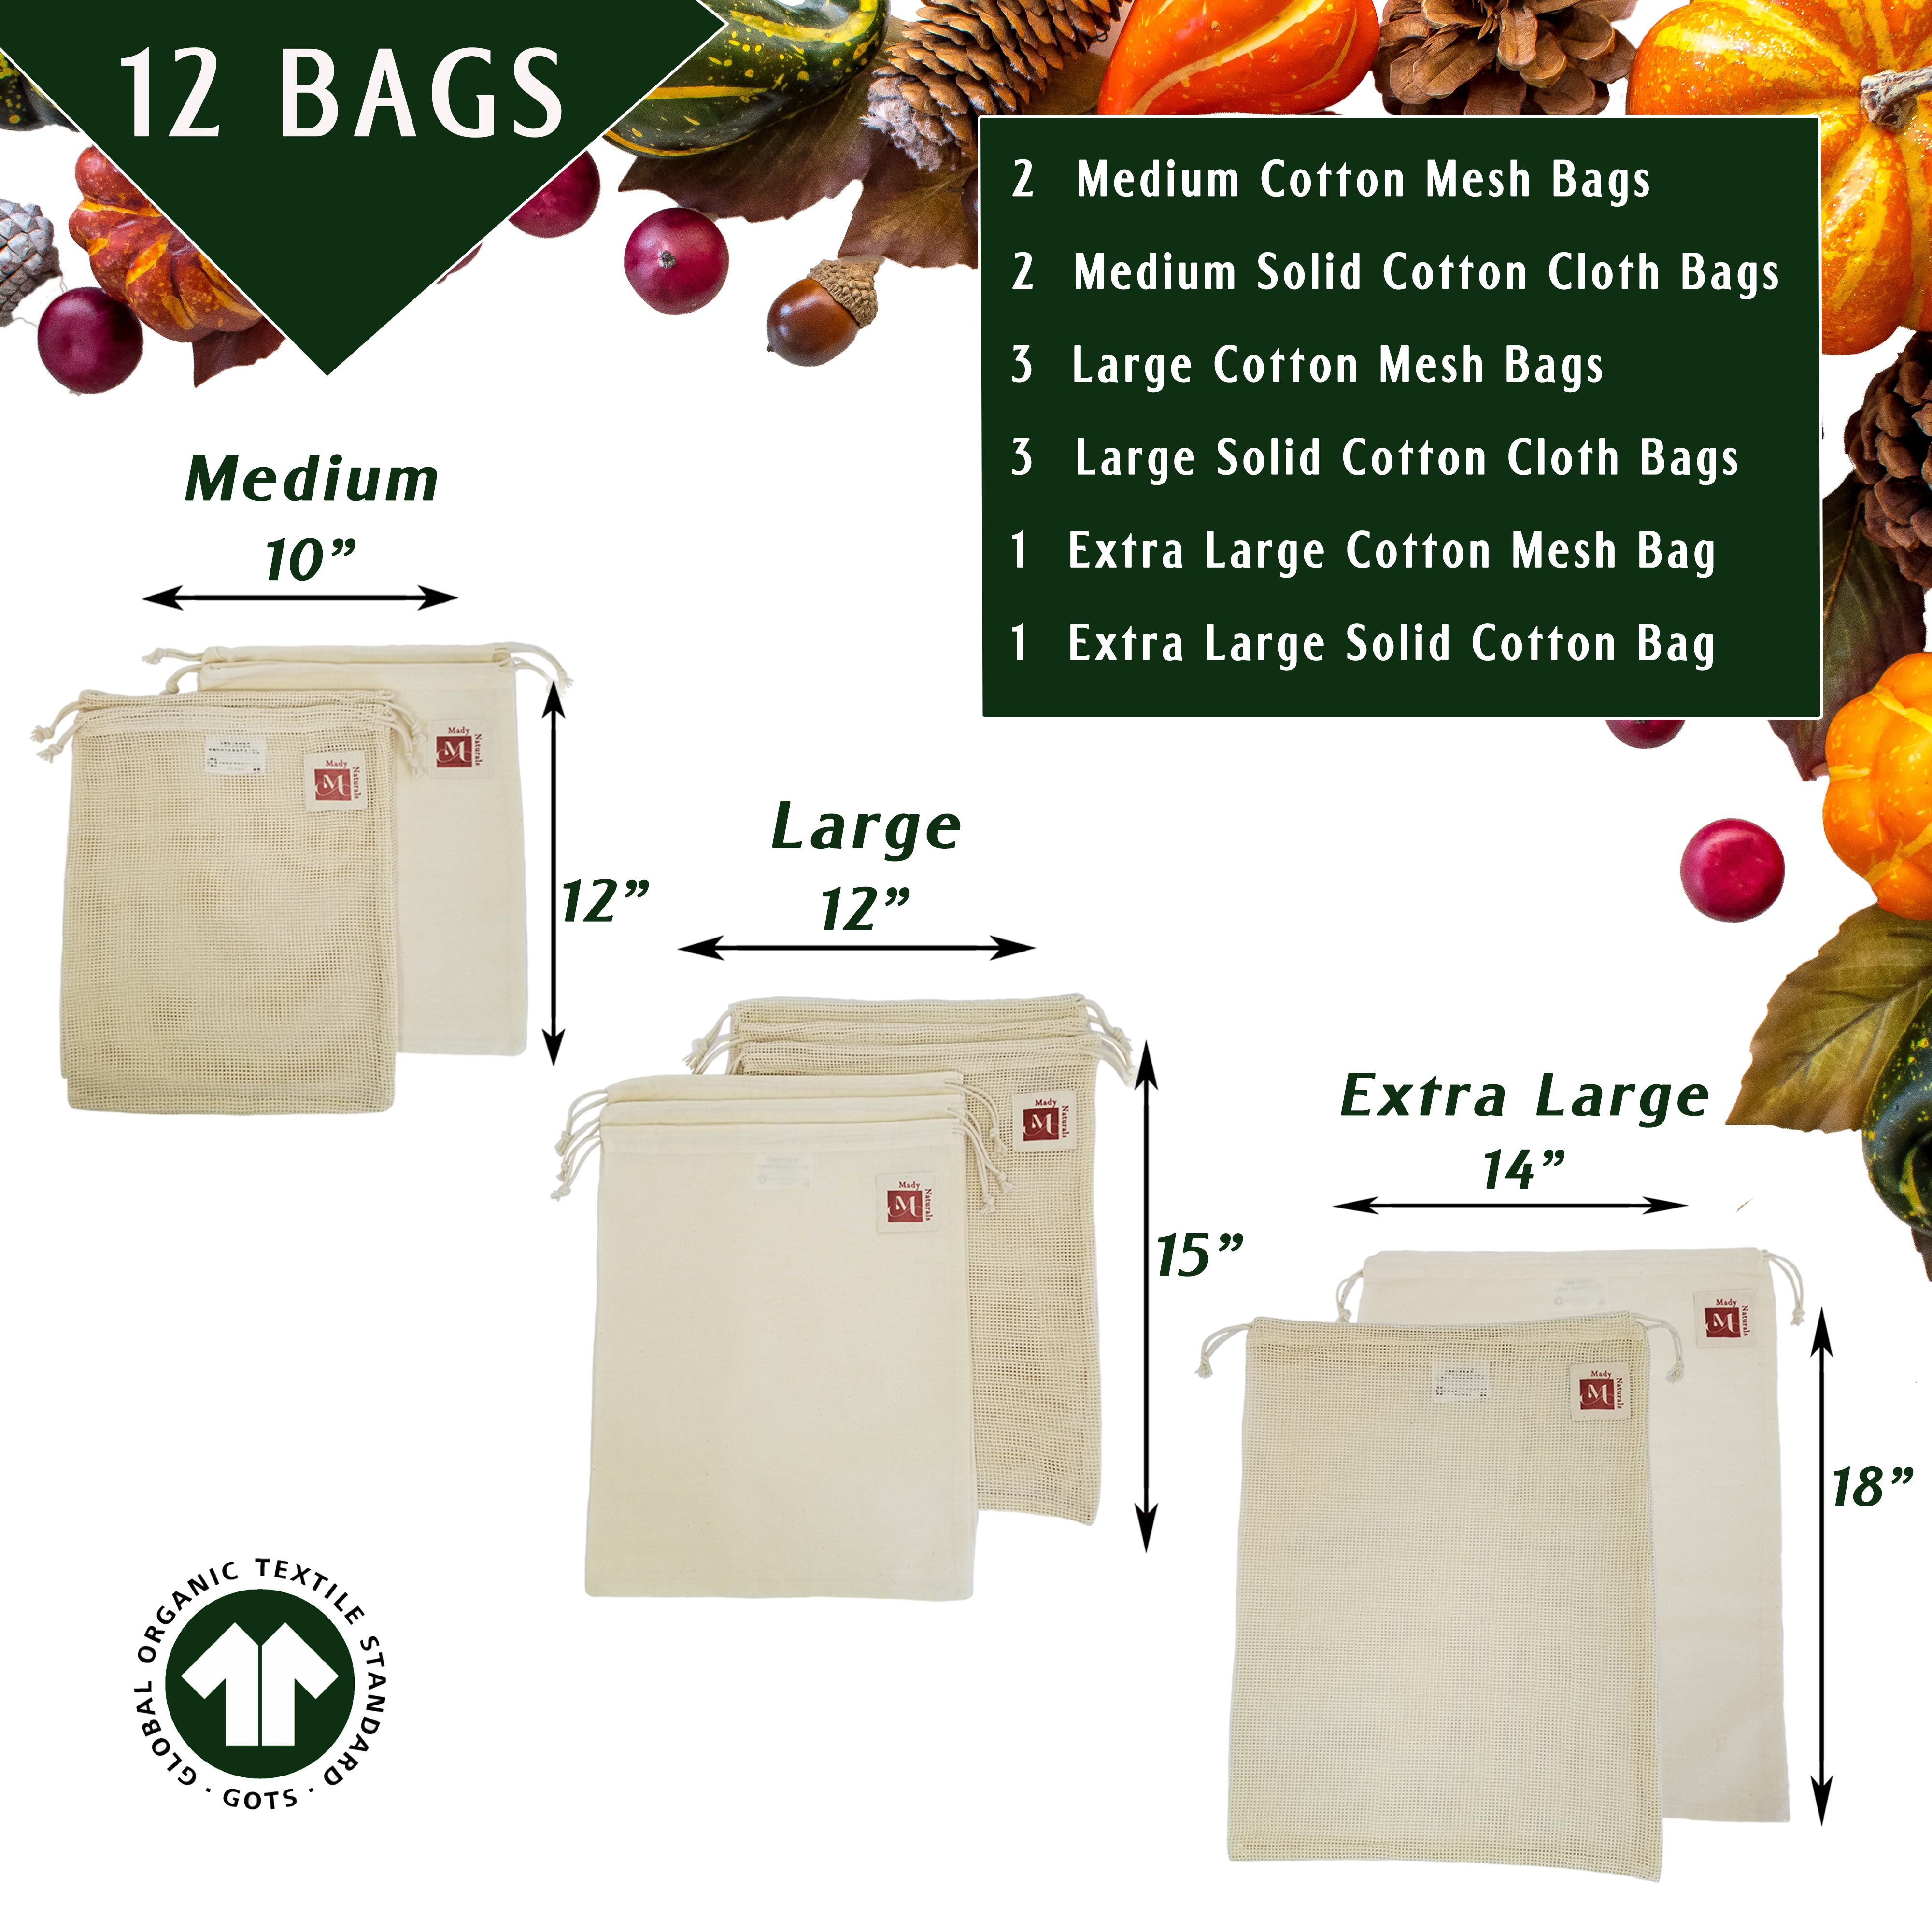 Number of bags and sizes